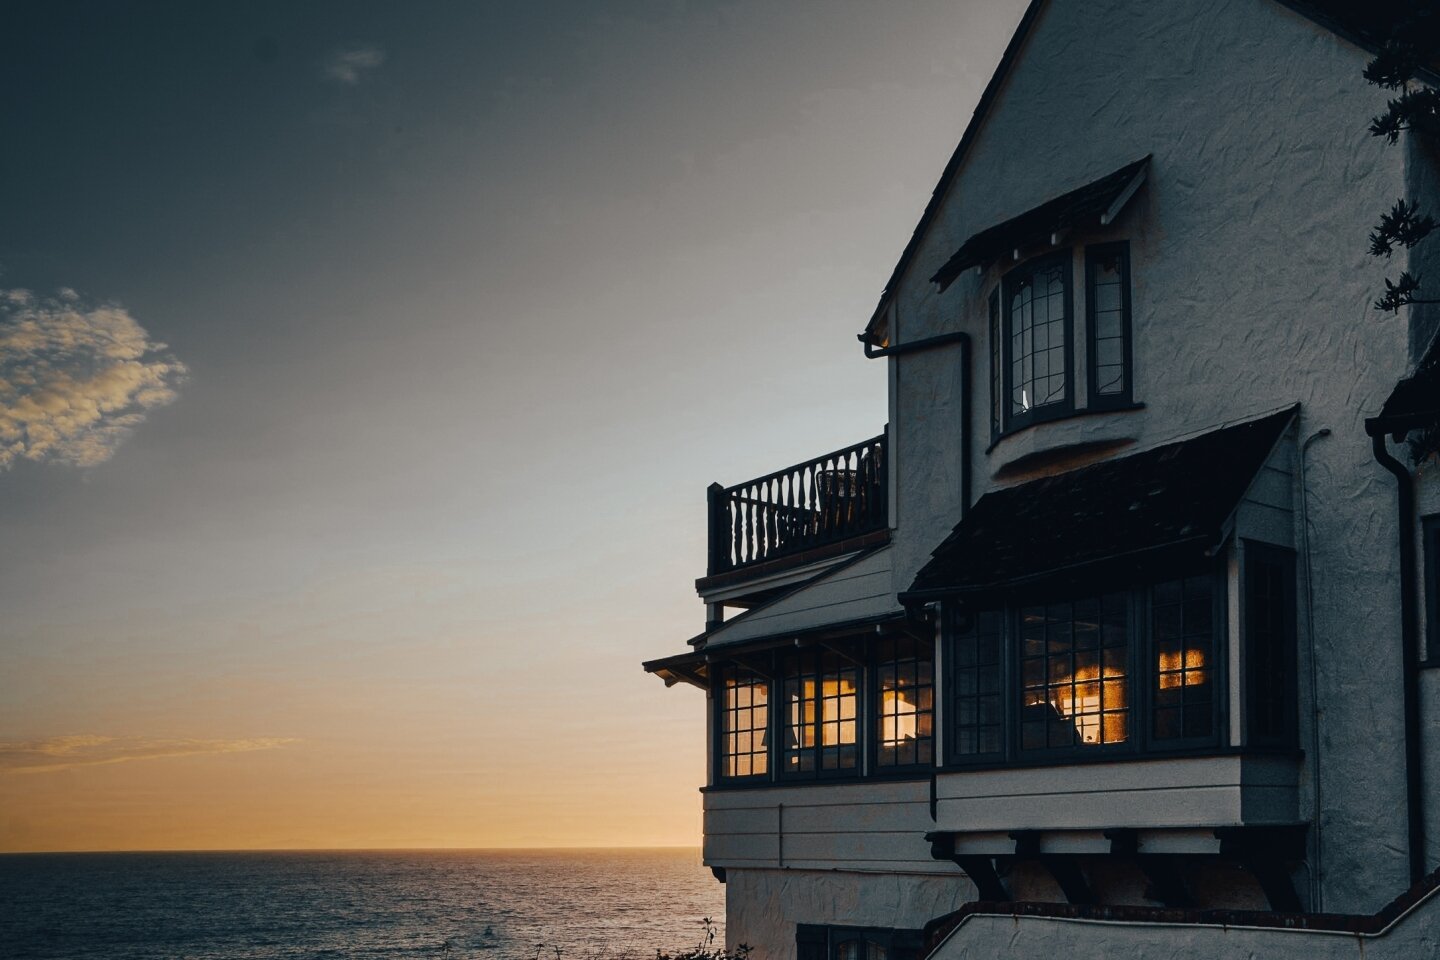 From my &quot;Future Home&quot; Series: Betty Davis's house at 1991 Ocean Way, Laguna Beach. 

Just the sunset on the Pacific Ocean makes me want it. Only $20 millions separates me.

#bettydavis #house #lagunabeach #sunset #pacificocean #coast #ocean